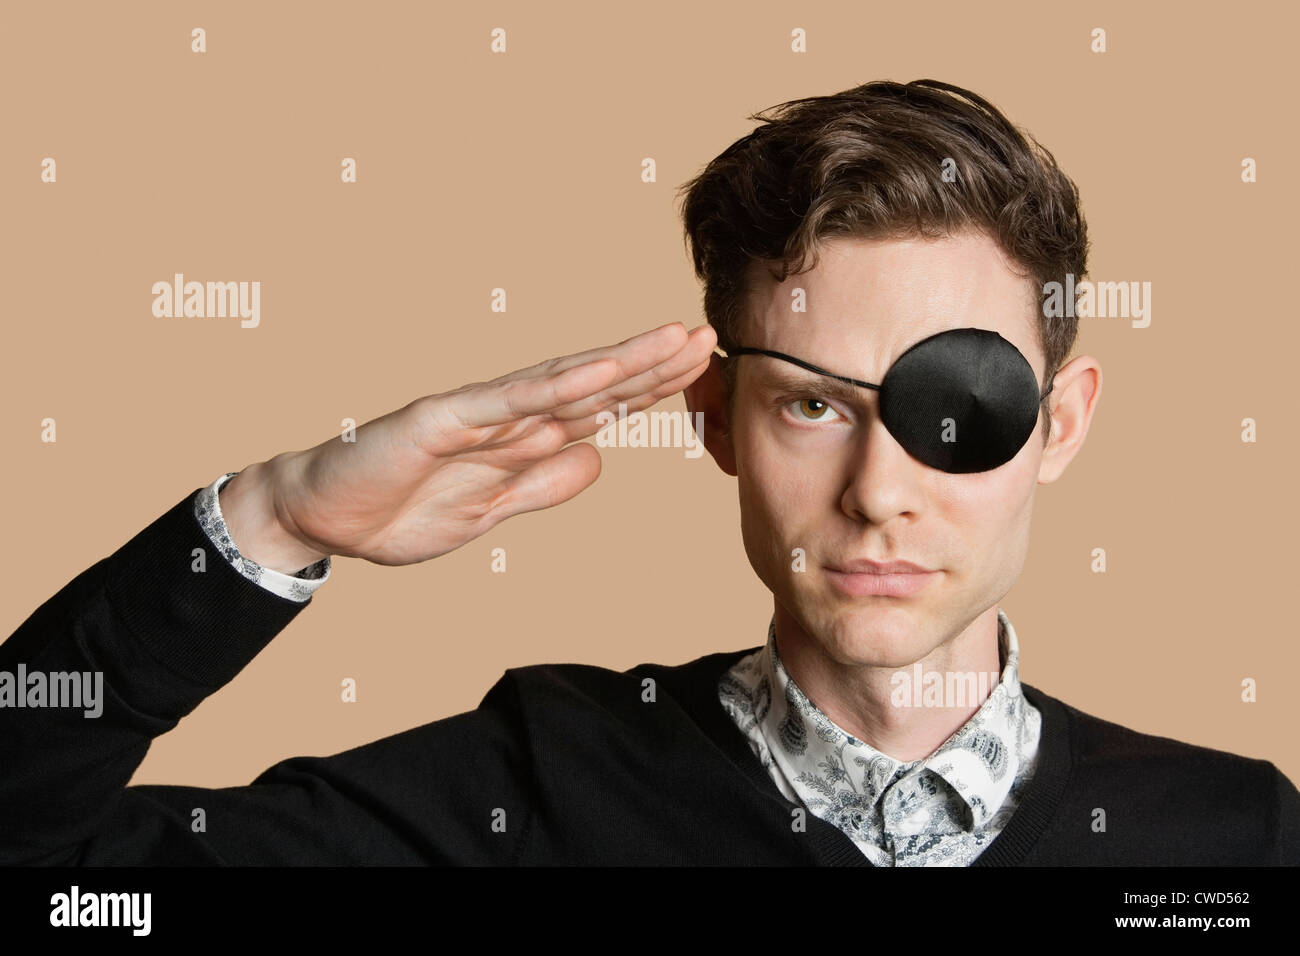 Portrait of a man wearing eye patch saluting over colored background Stock Photo